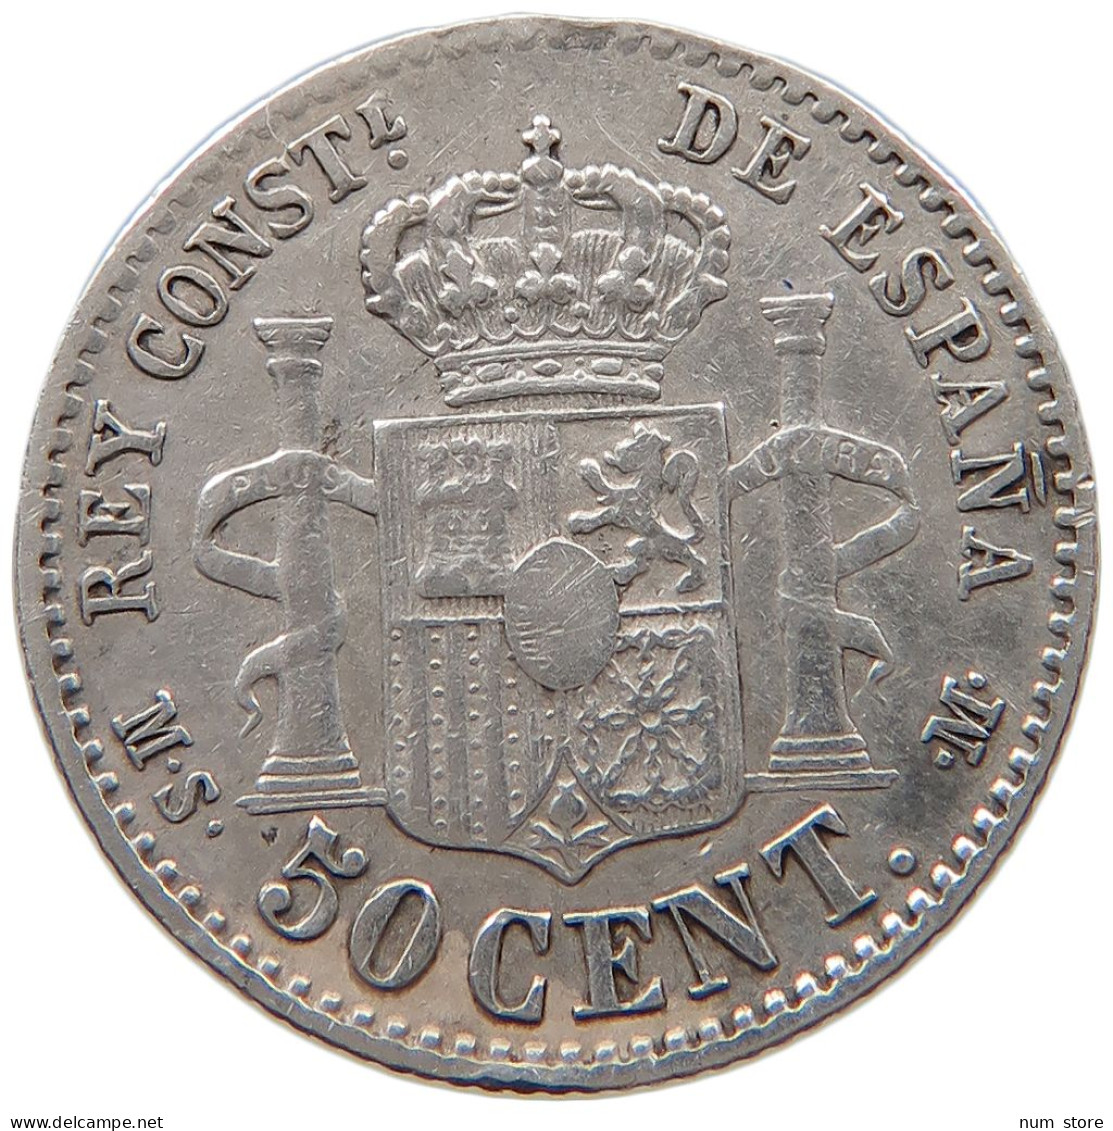 SPAIN 50 CENTIMOS 1880 #s101 0041 - First Minting